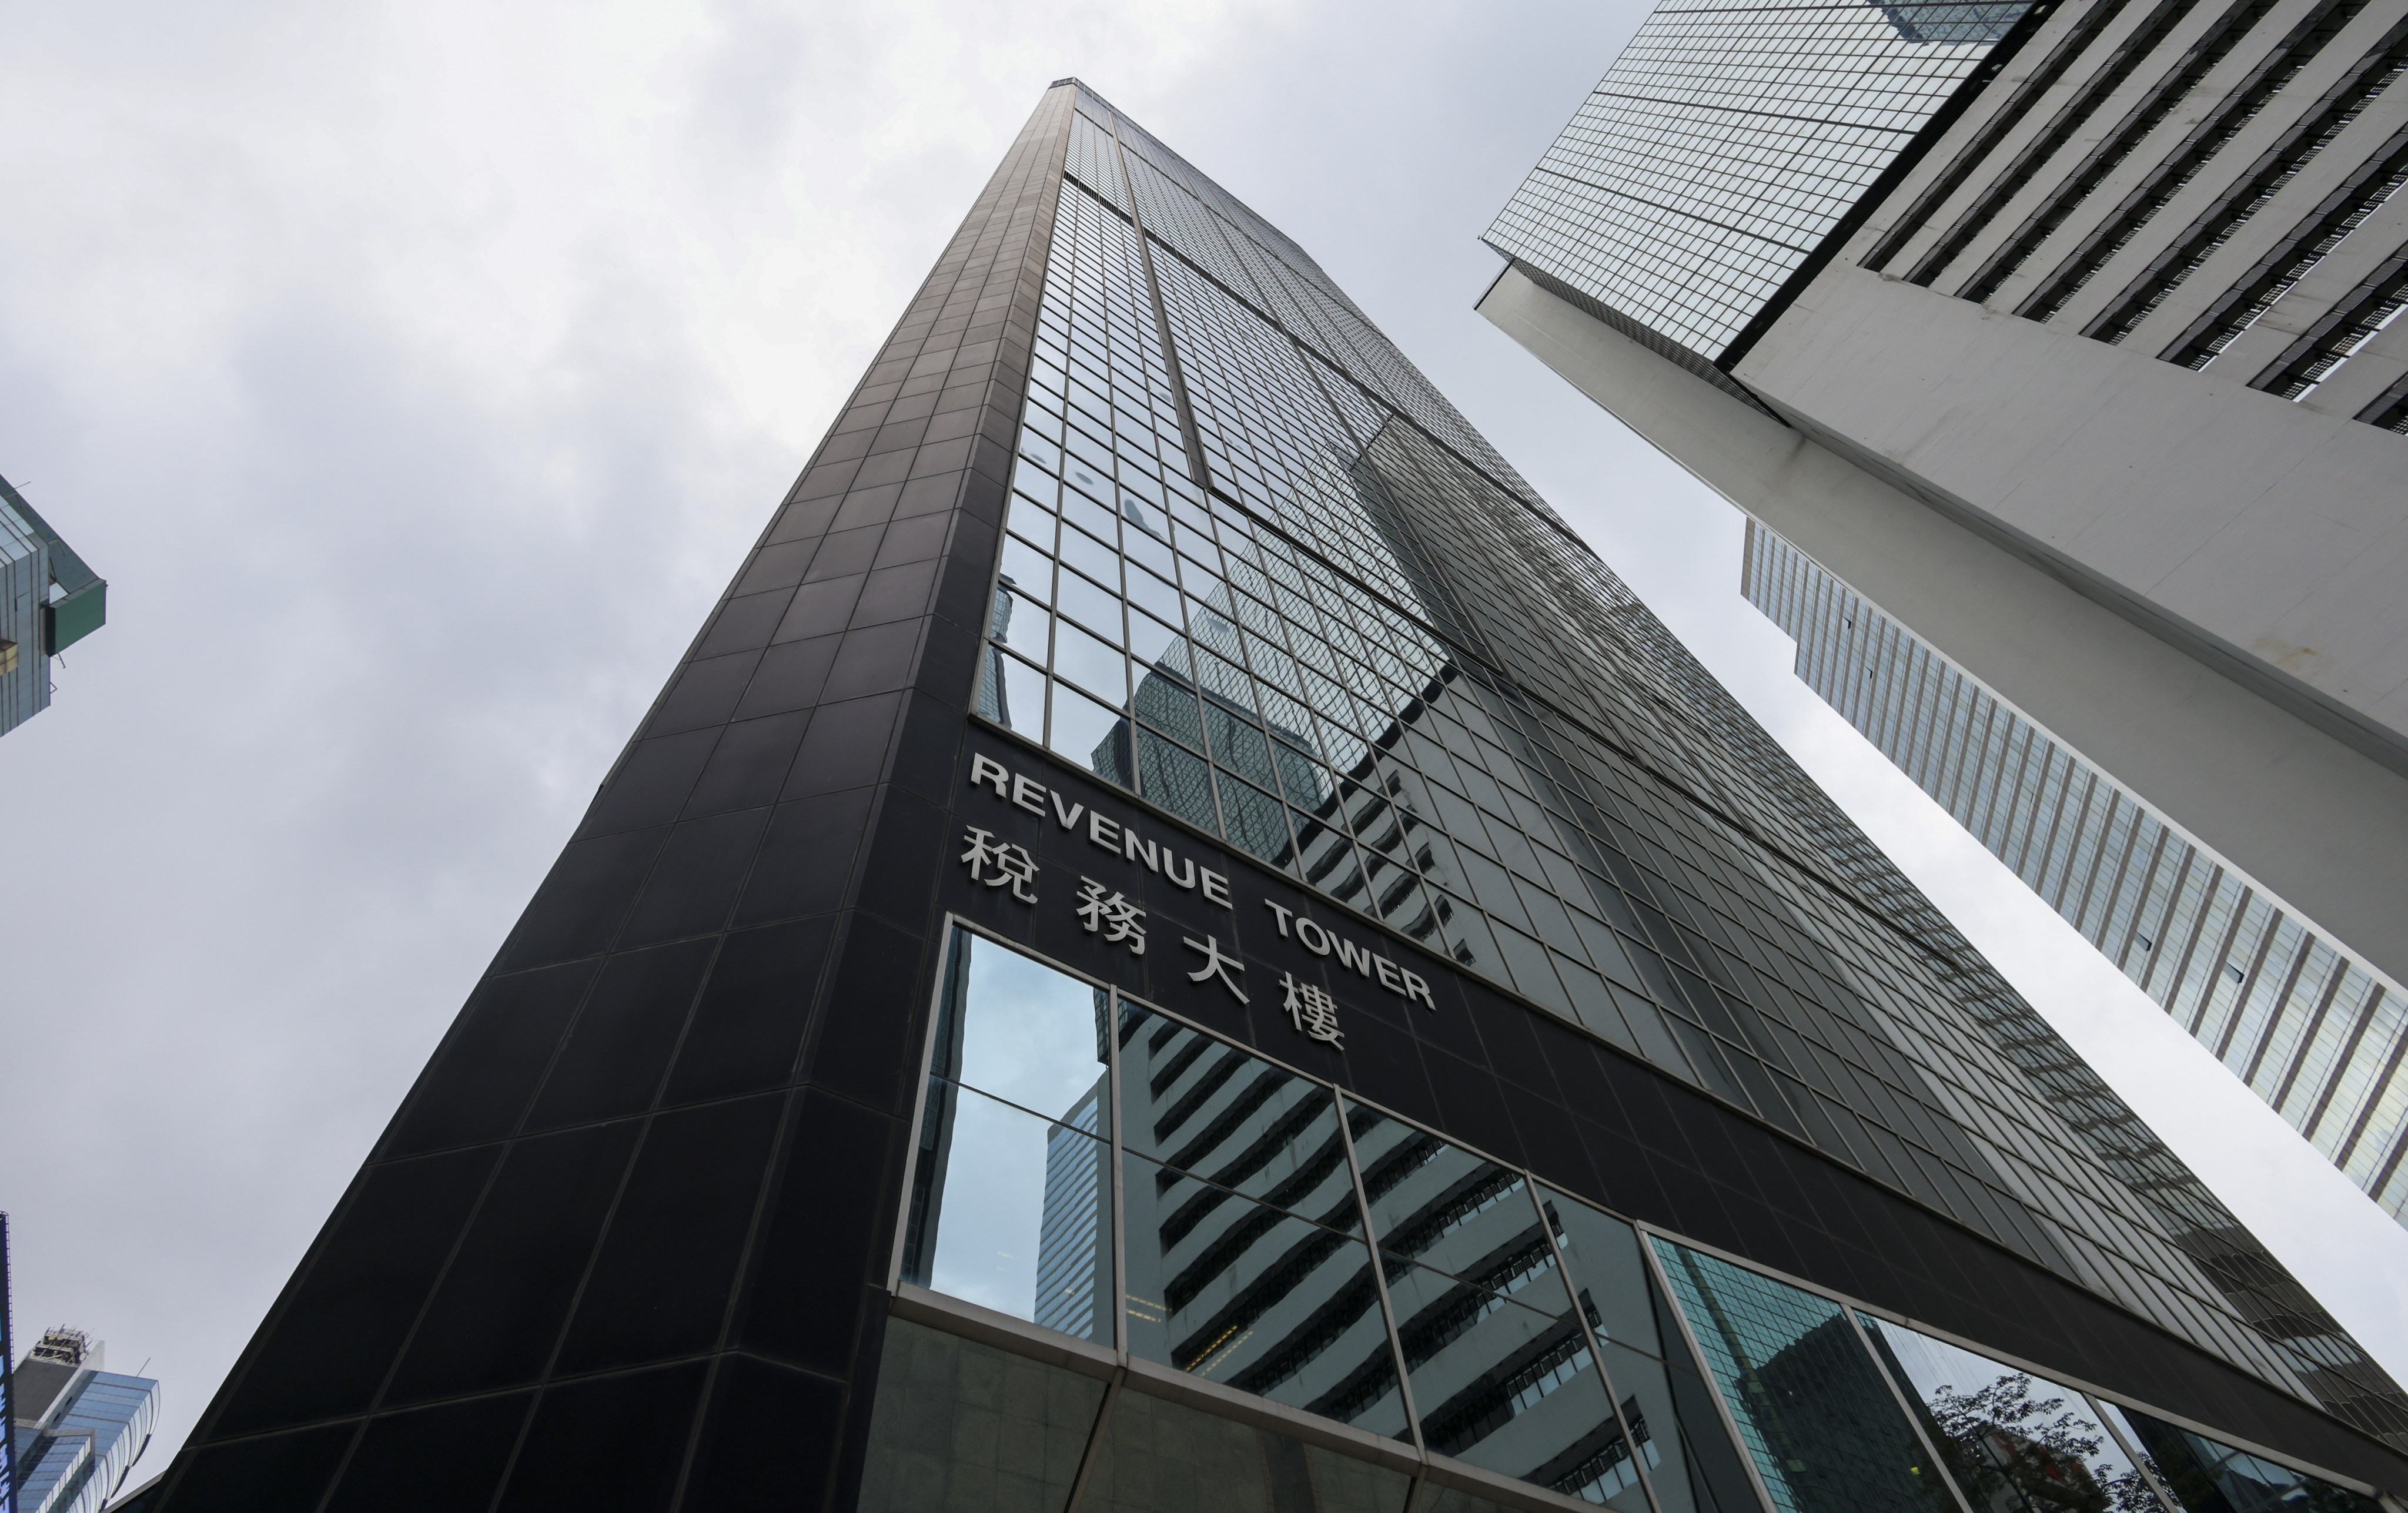 Revenue Tower in Wan Chai, Hong Kong pictured on June 1, 2022. Photo: Dickson Lee